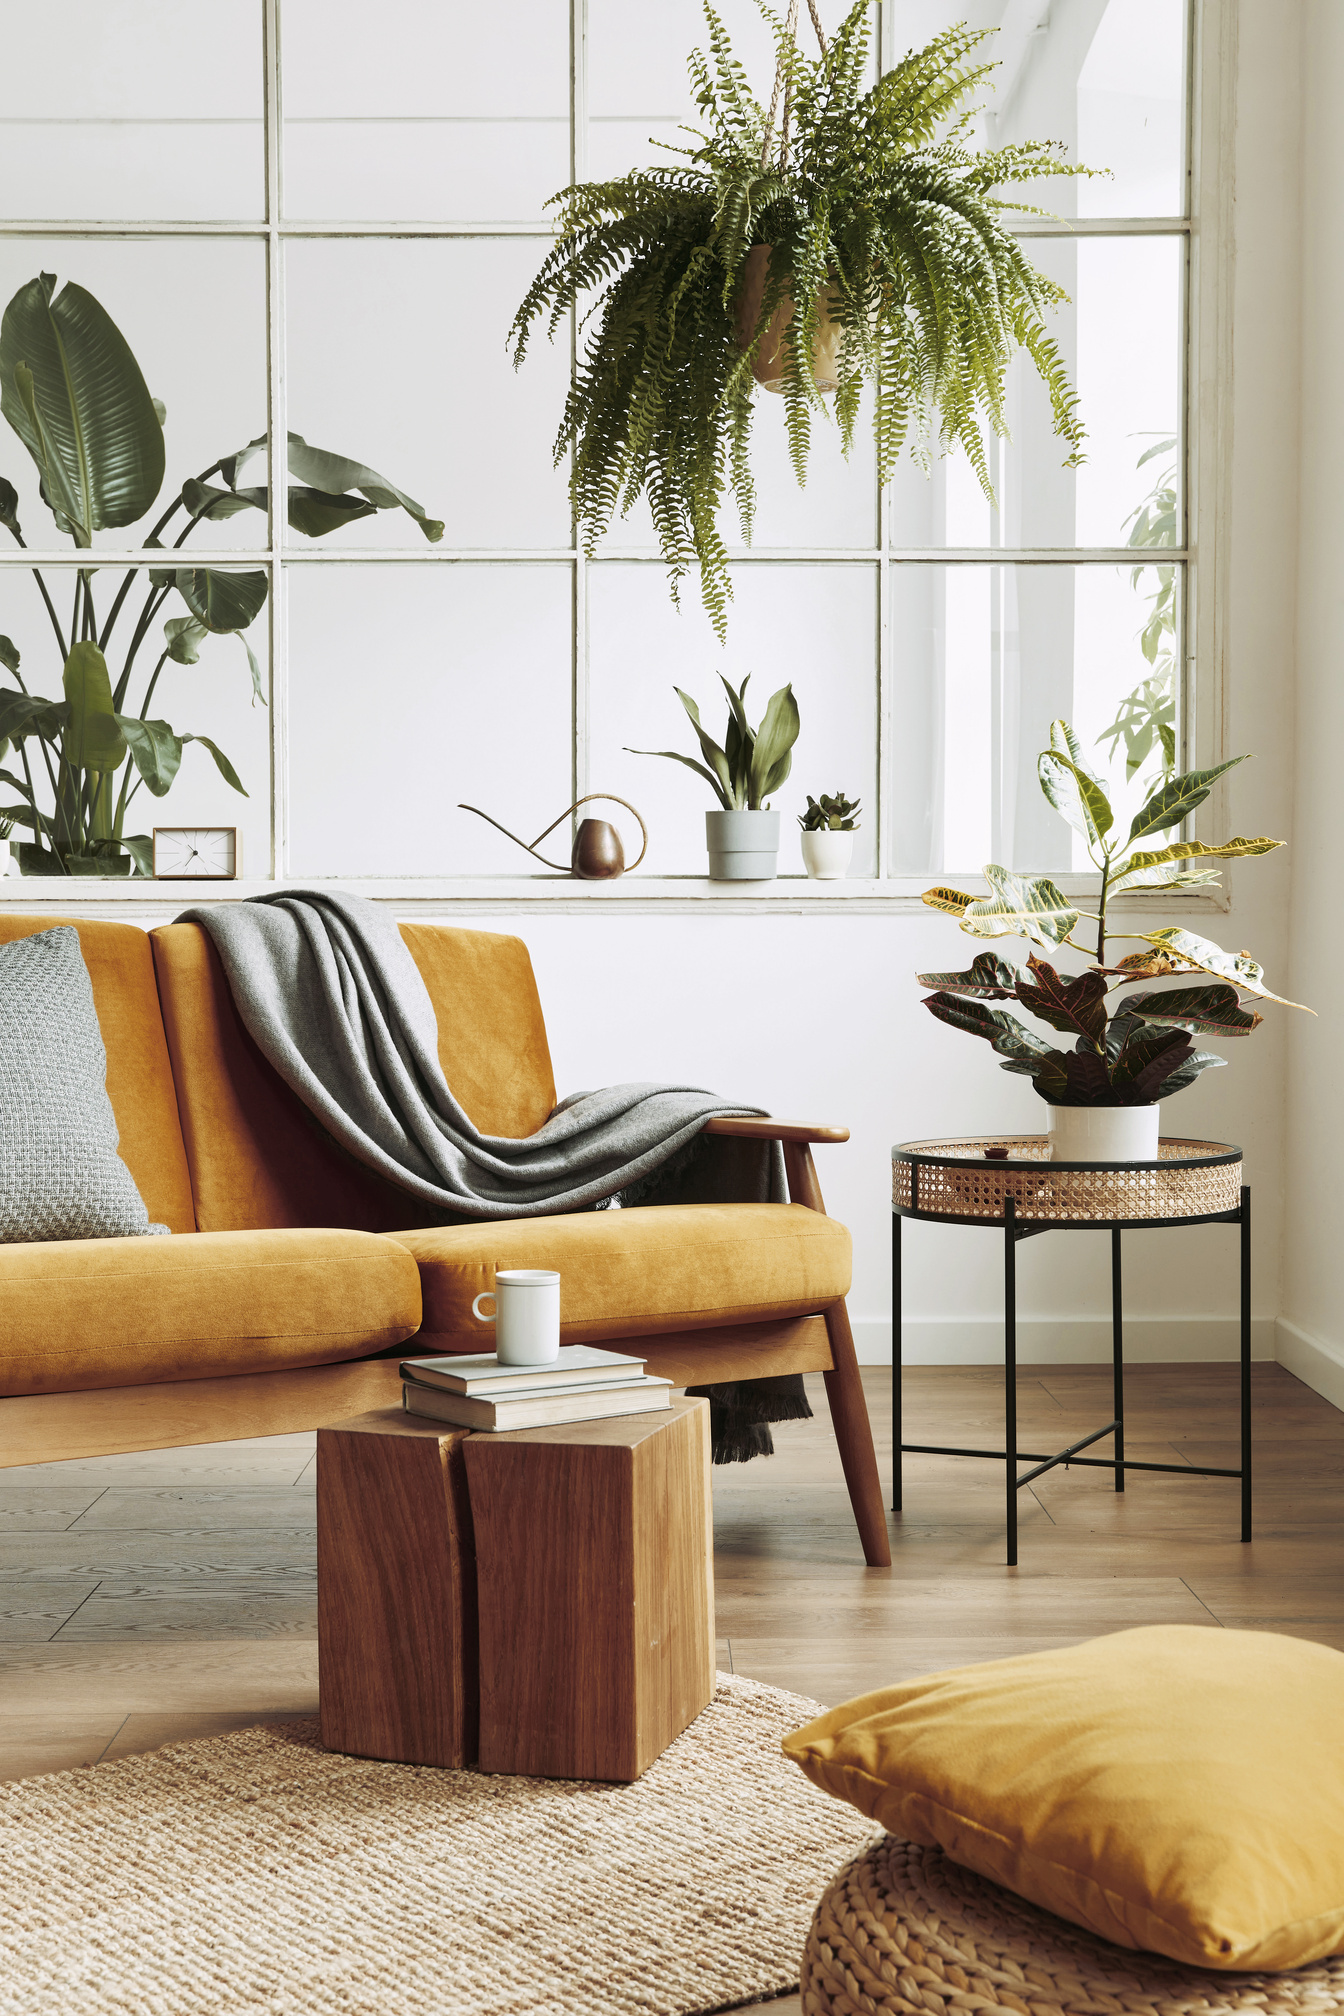 Interior design of scandinavian open space with velvet sofa, plants, furniture, in stylish home staging. Template.